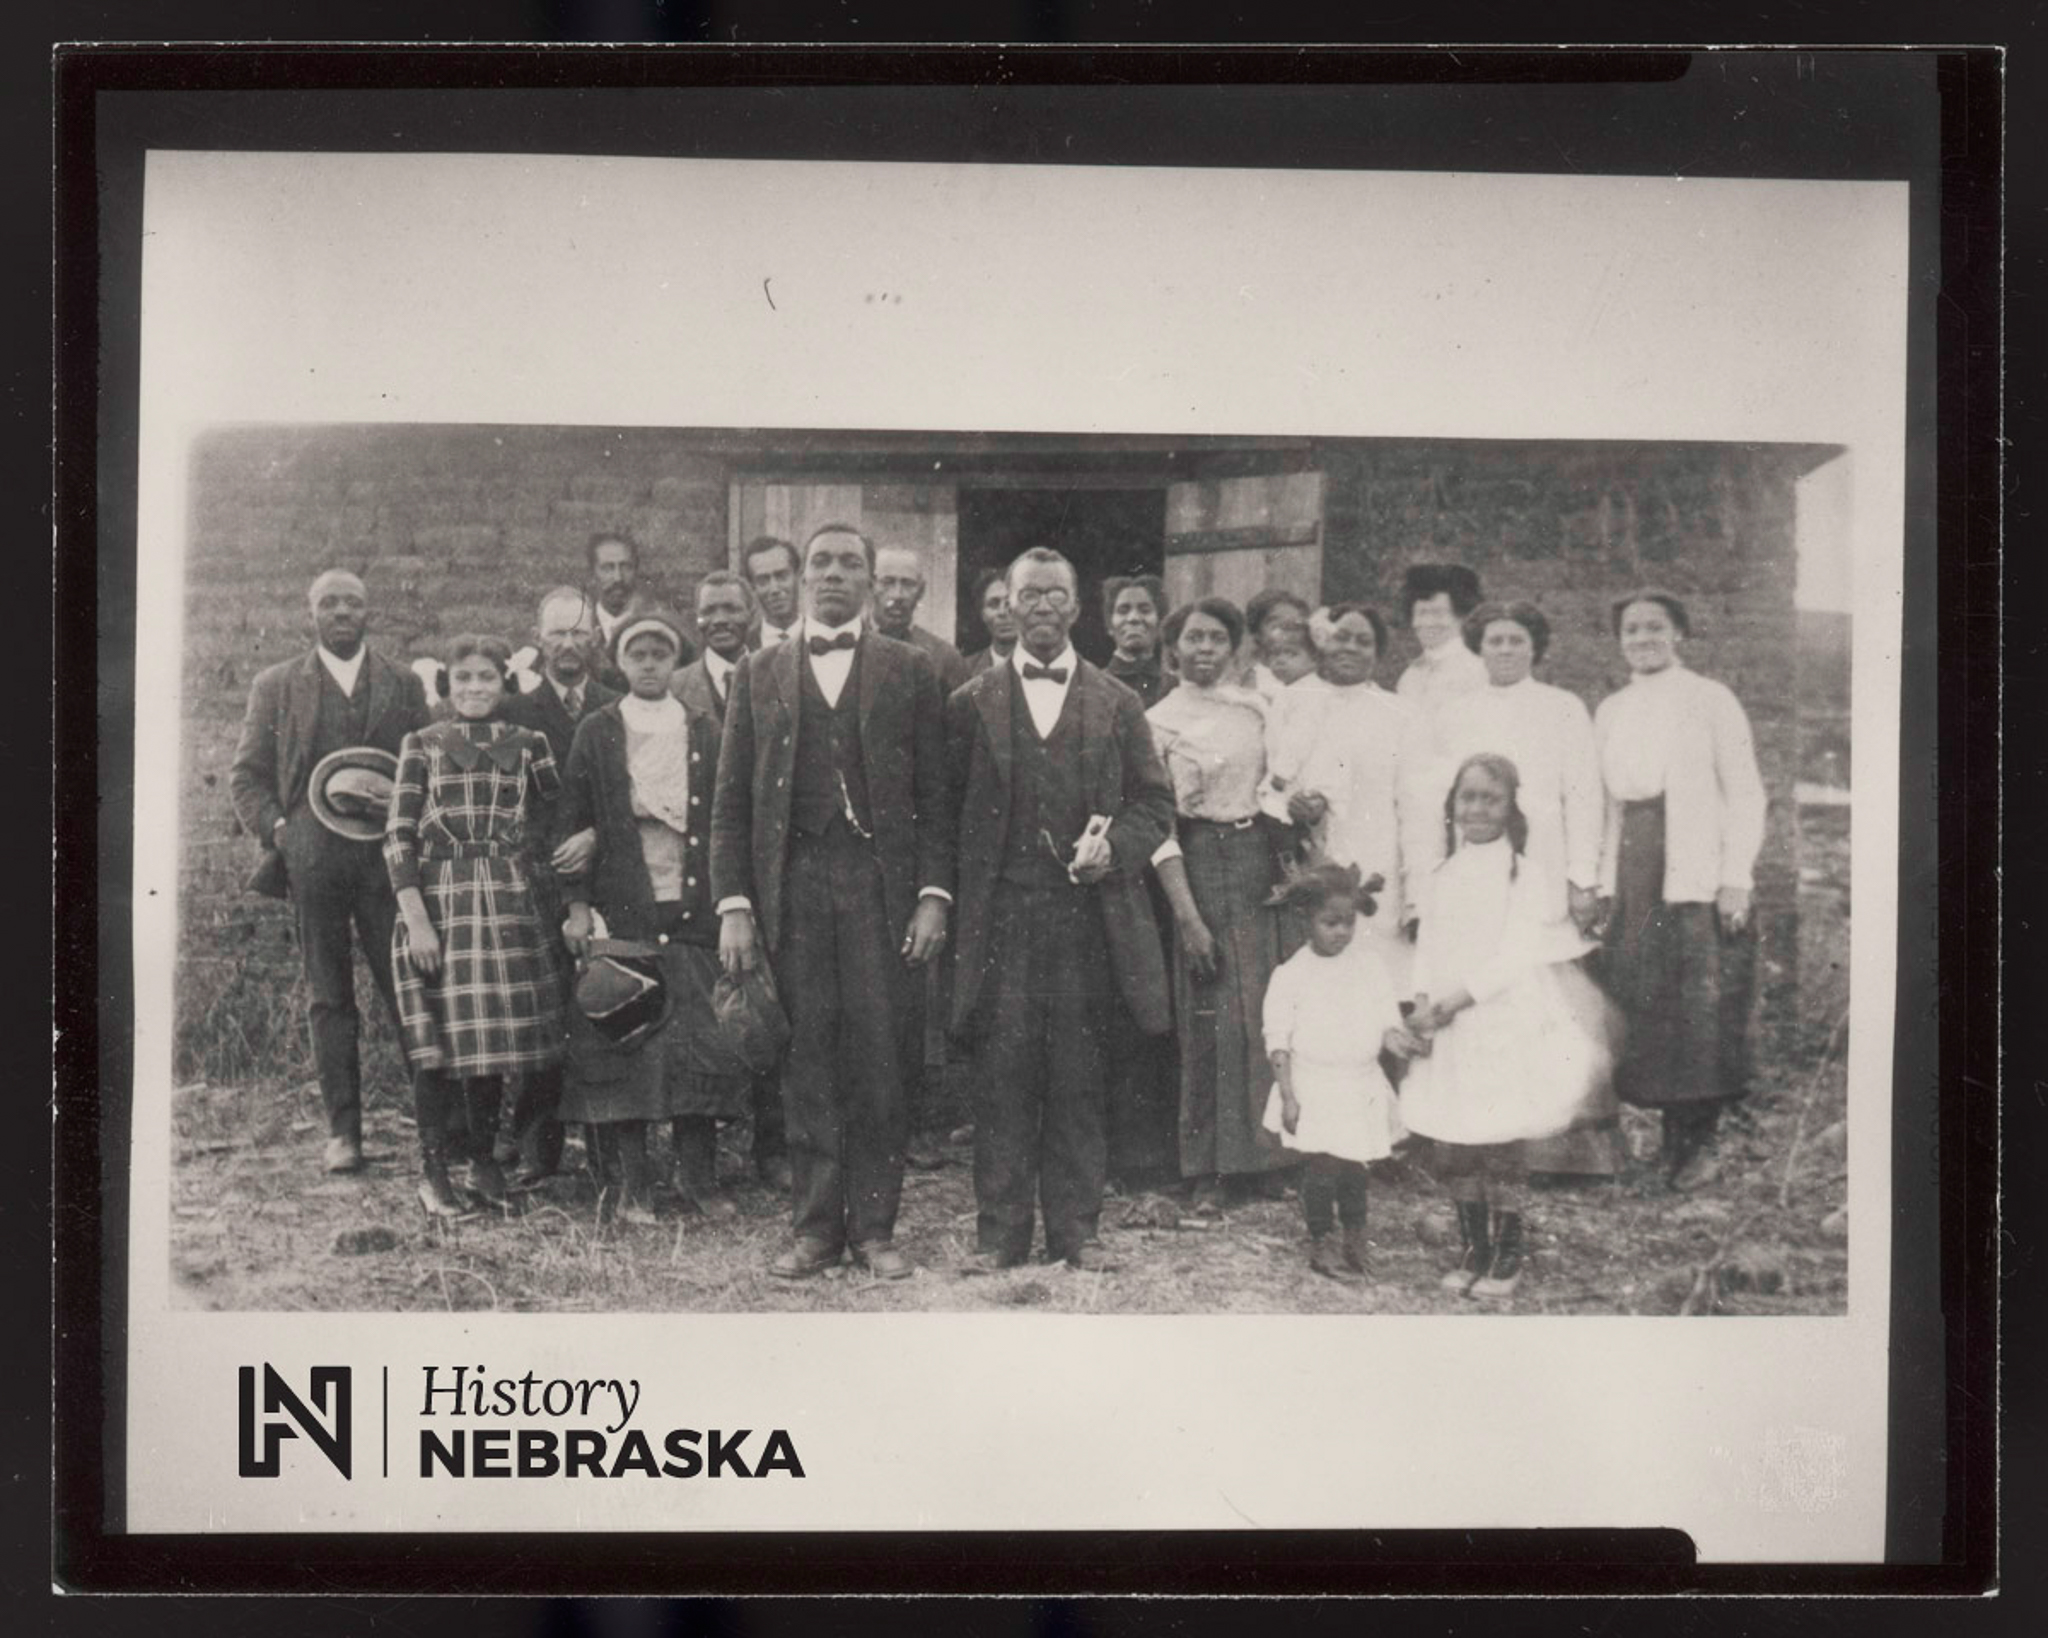 DeWitty Settlement, home to the largest populations of African Americans who homesteaded in Nebraska in the early 1900s